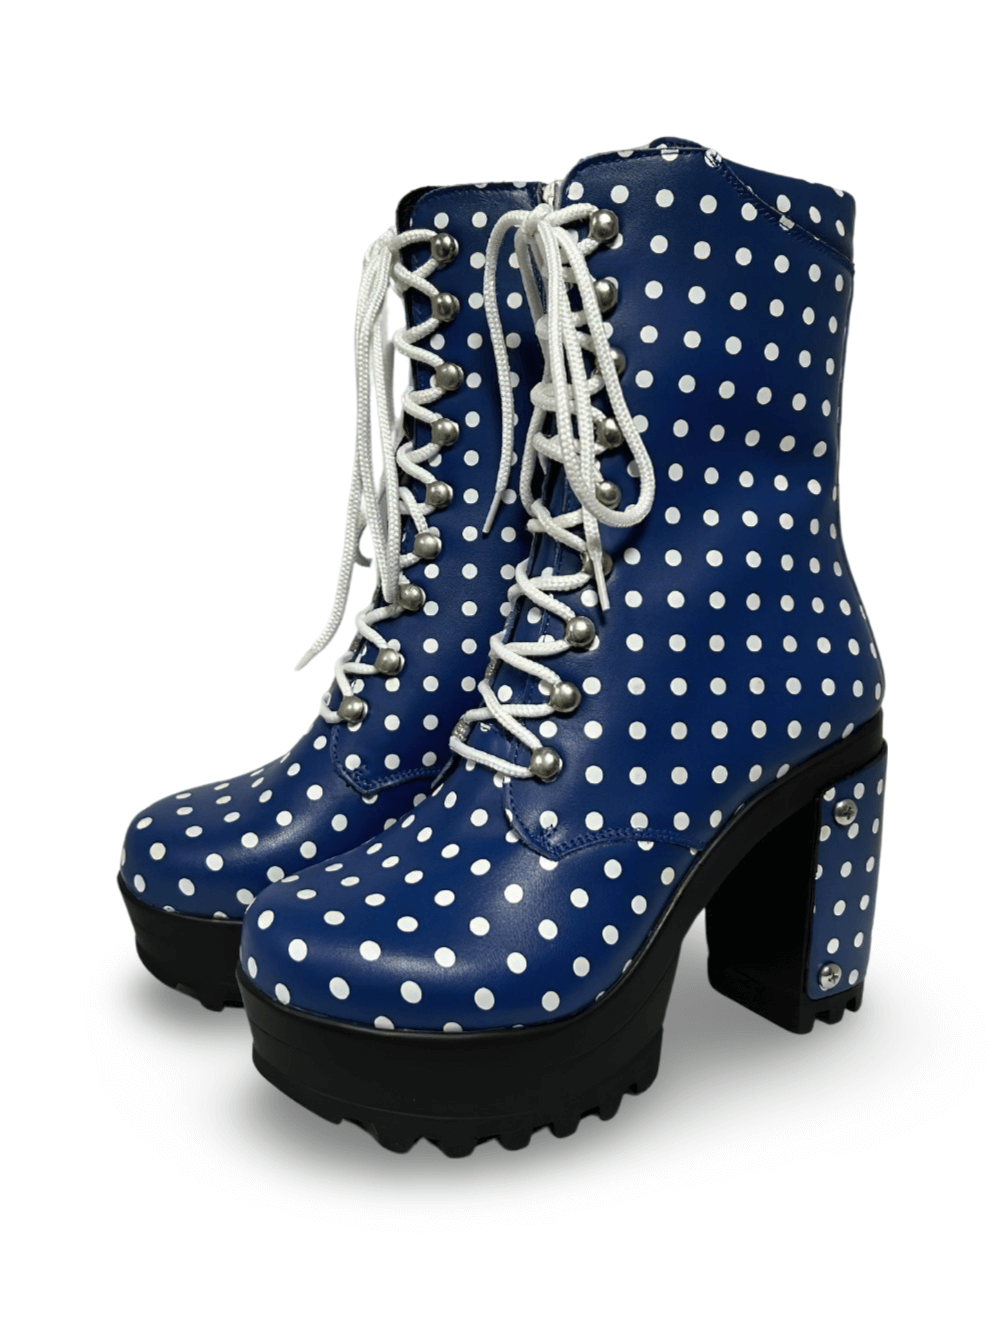 Chic Polka Dot Platform Shoes with Lace-up Detail